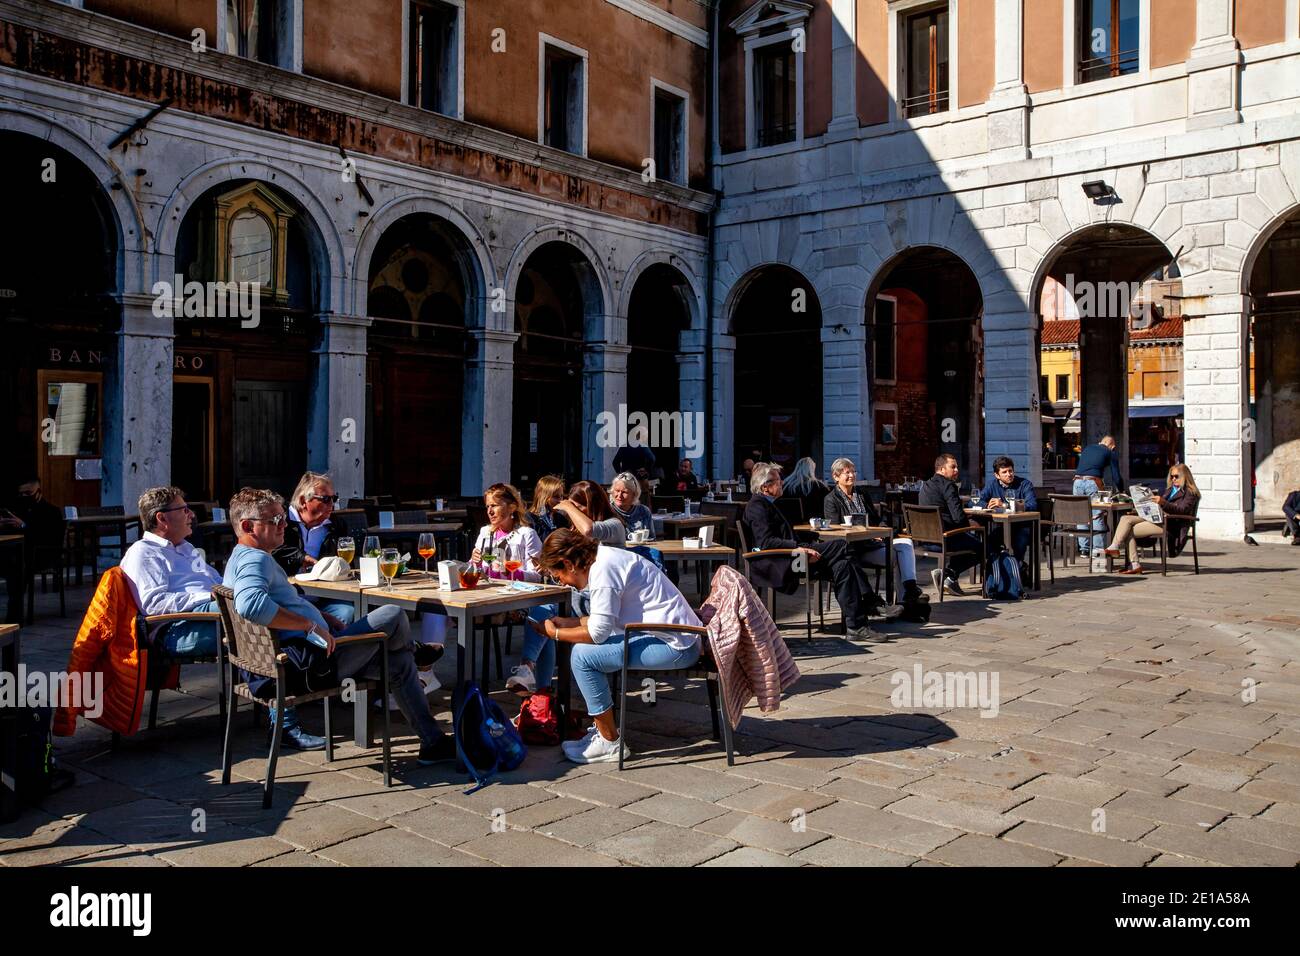 Tourists/Visitors Relaxing In The Sunshine At A Cafe Near The Rialto Bridge, Venice, Italy. Stock Photo